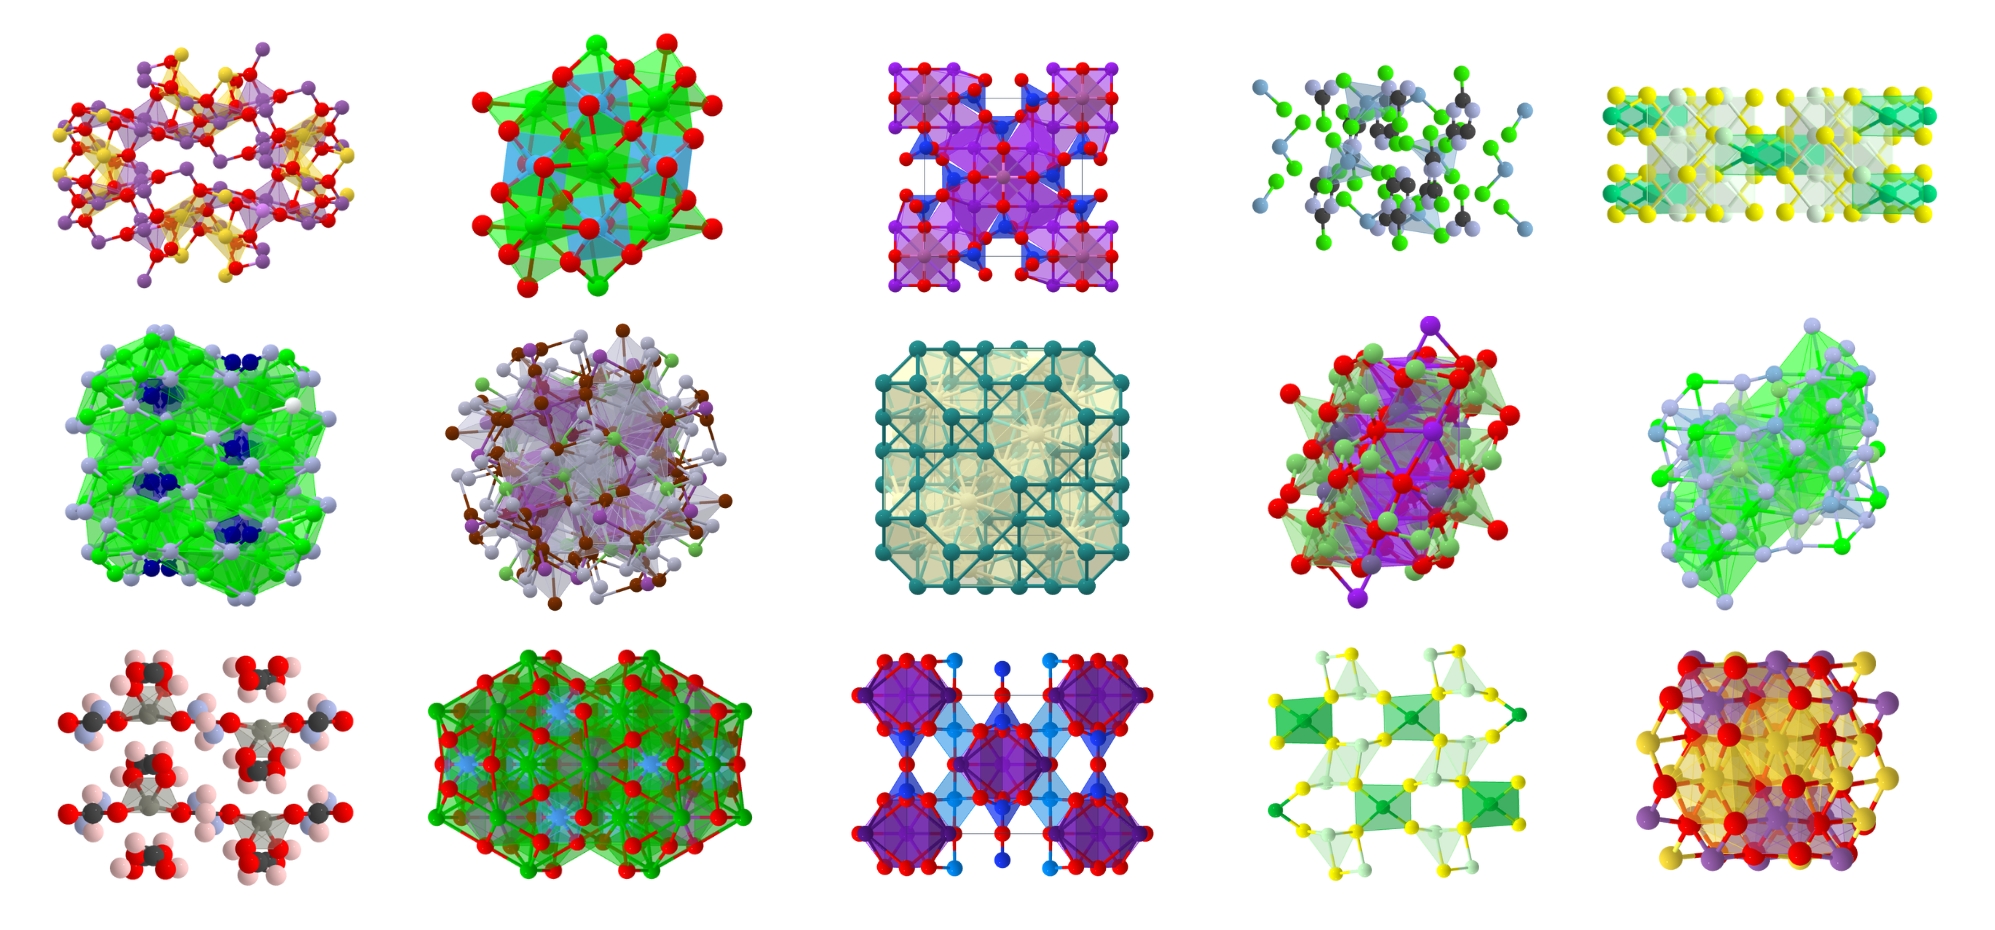 A composite image of colorful structural materials